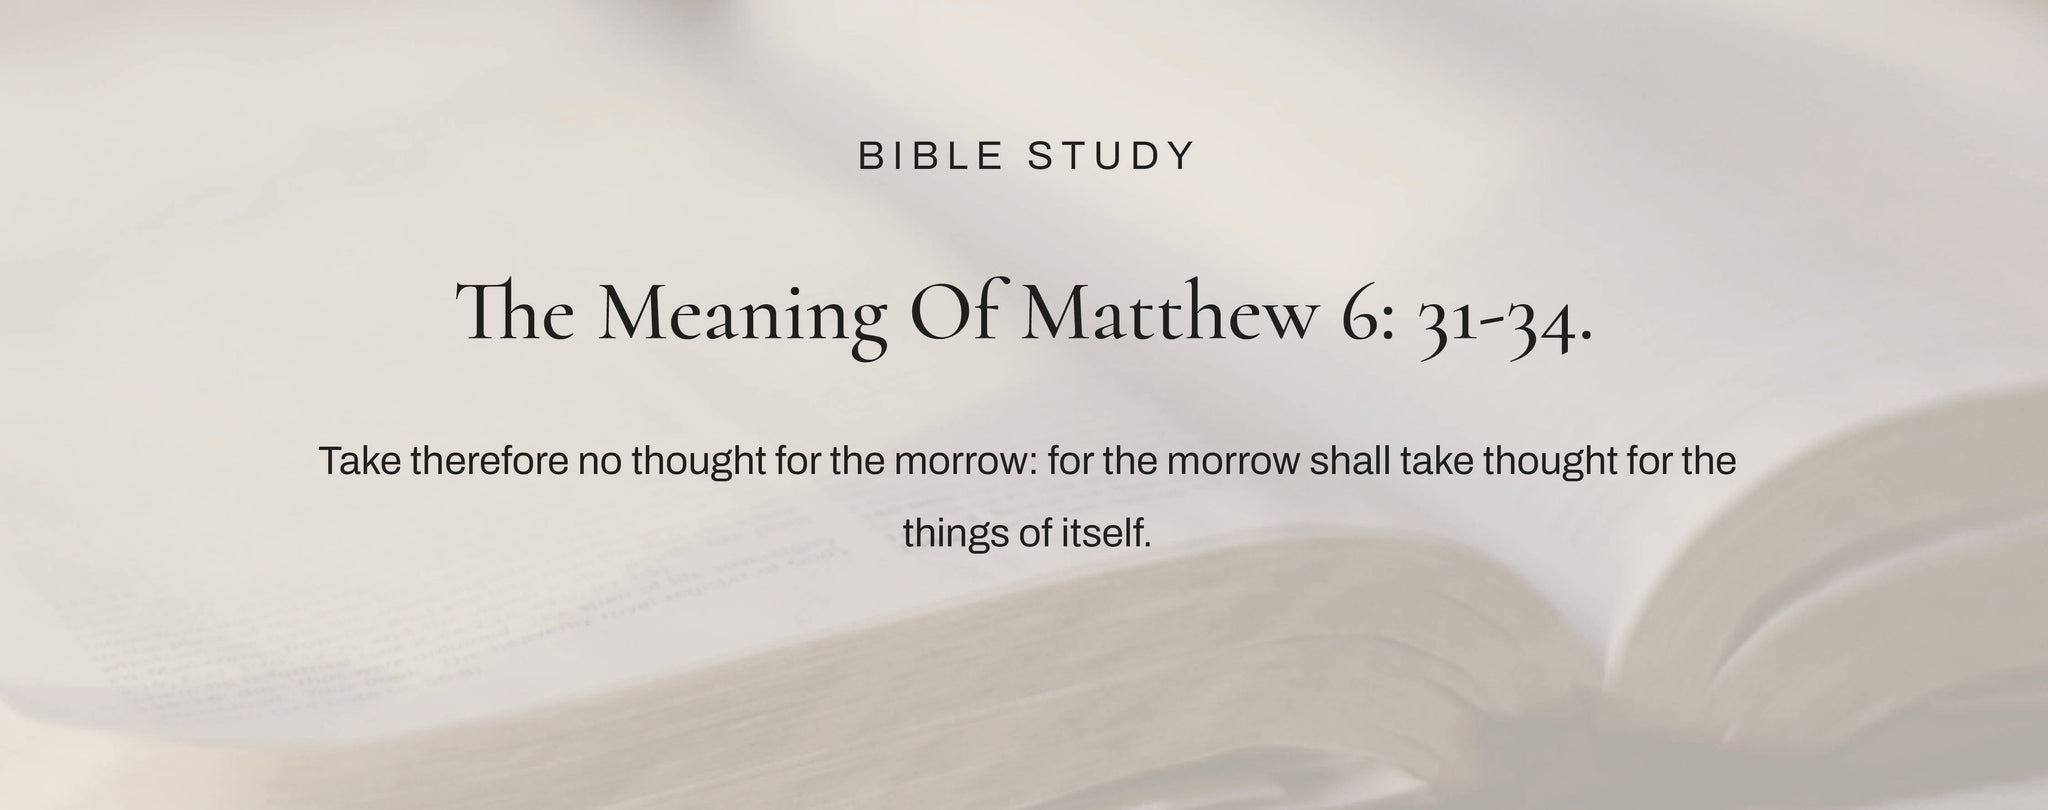 What Does Matthew 6: 31-34 Mean?